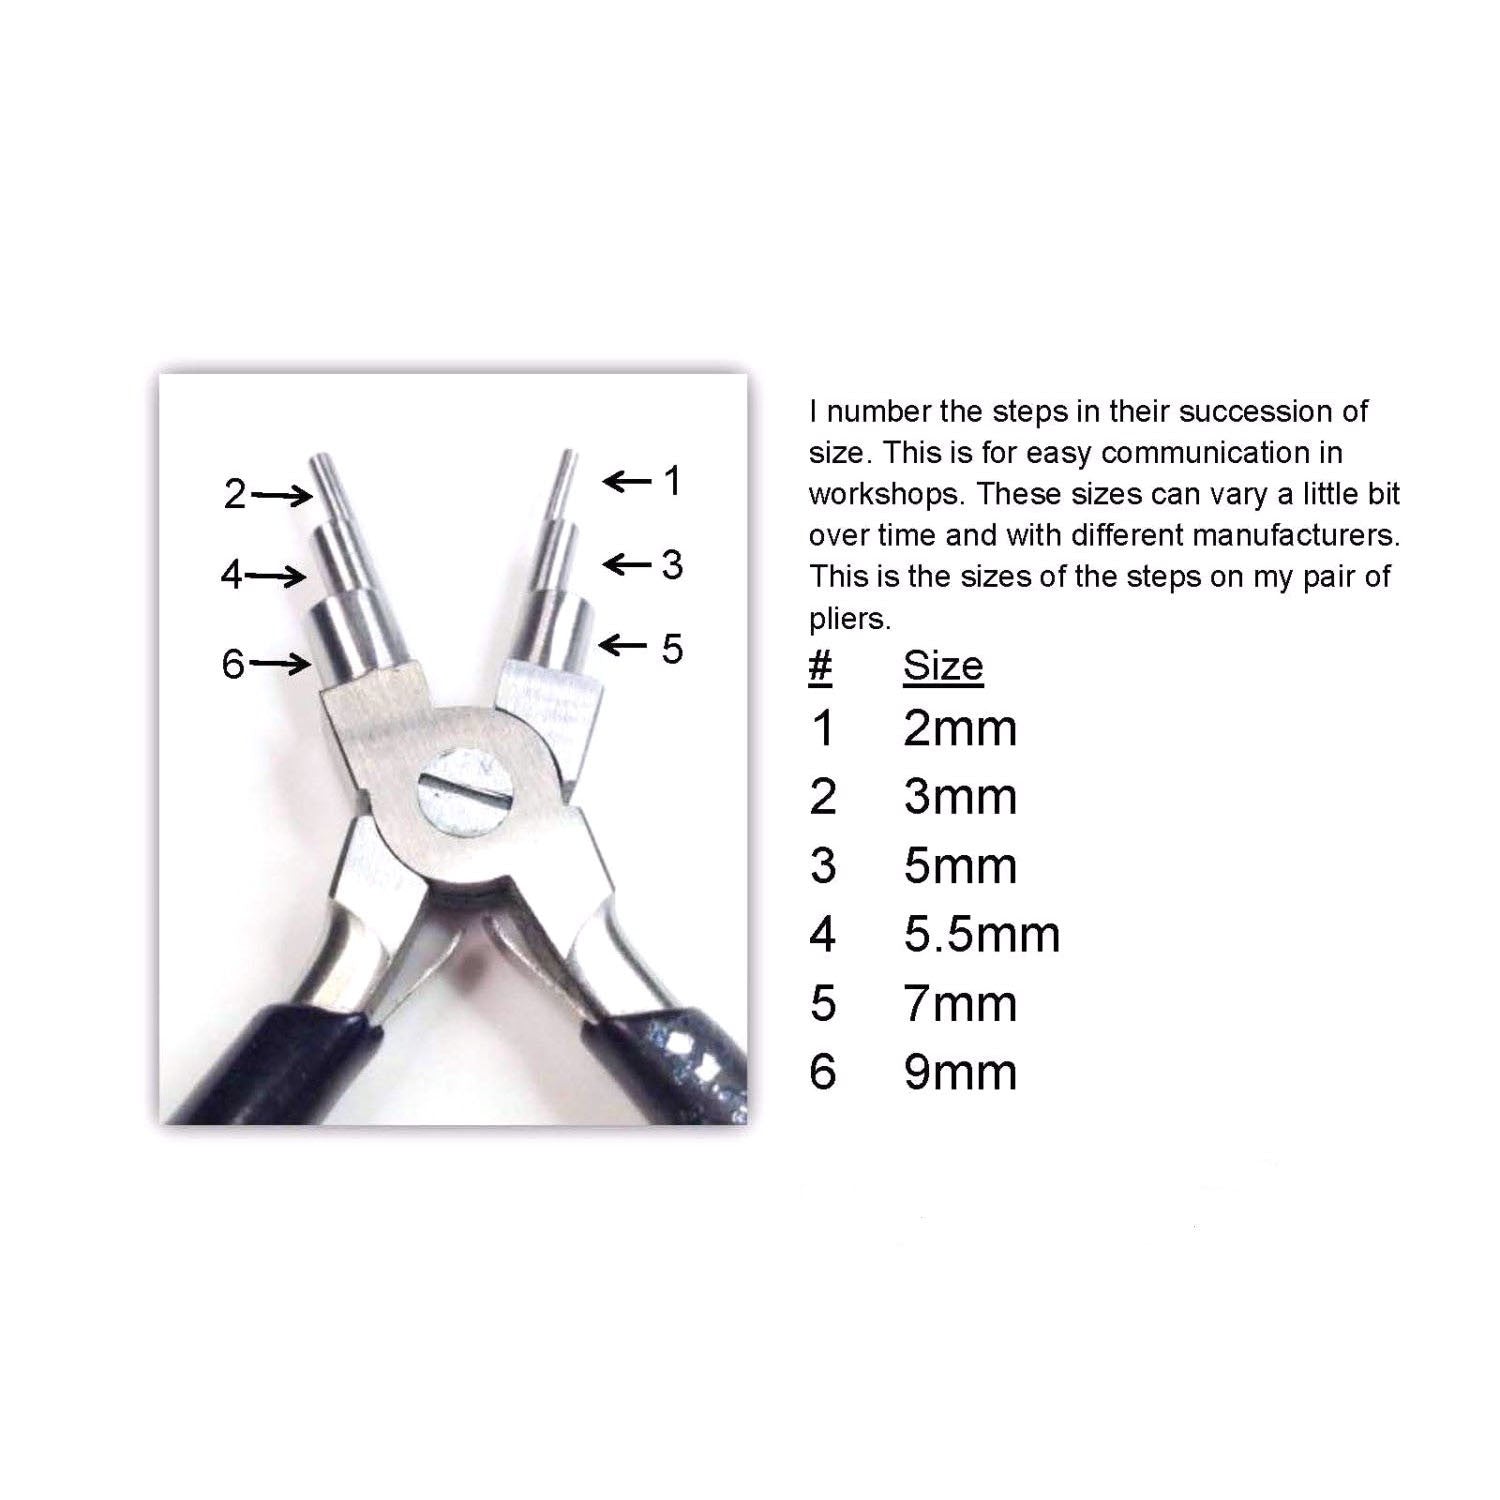 China Factory Iron Wire Looping Pliers, 6-in-1 Bail-Making Pliers